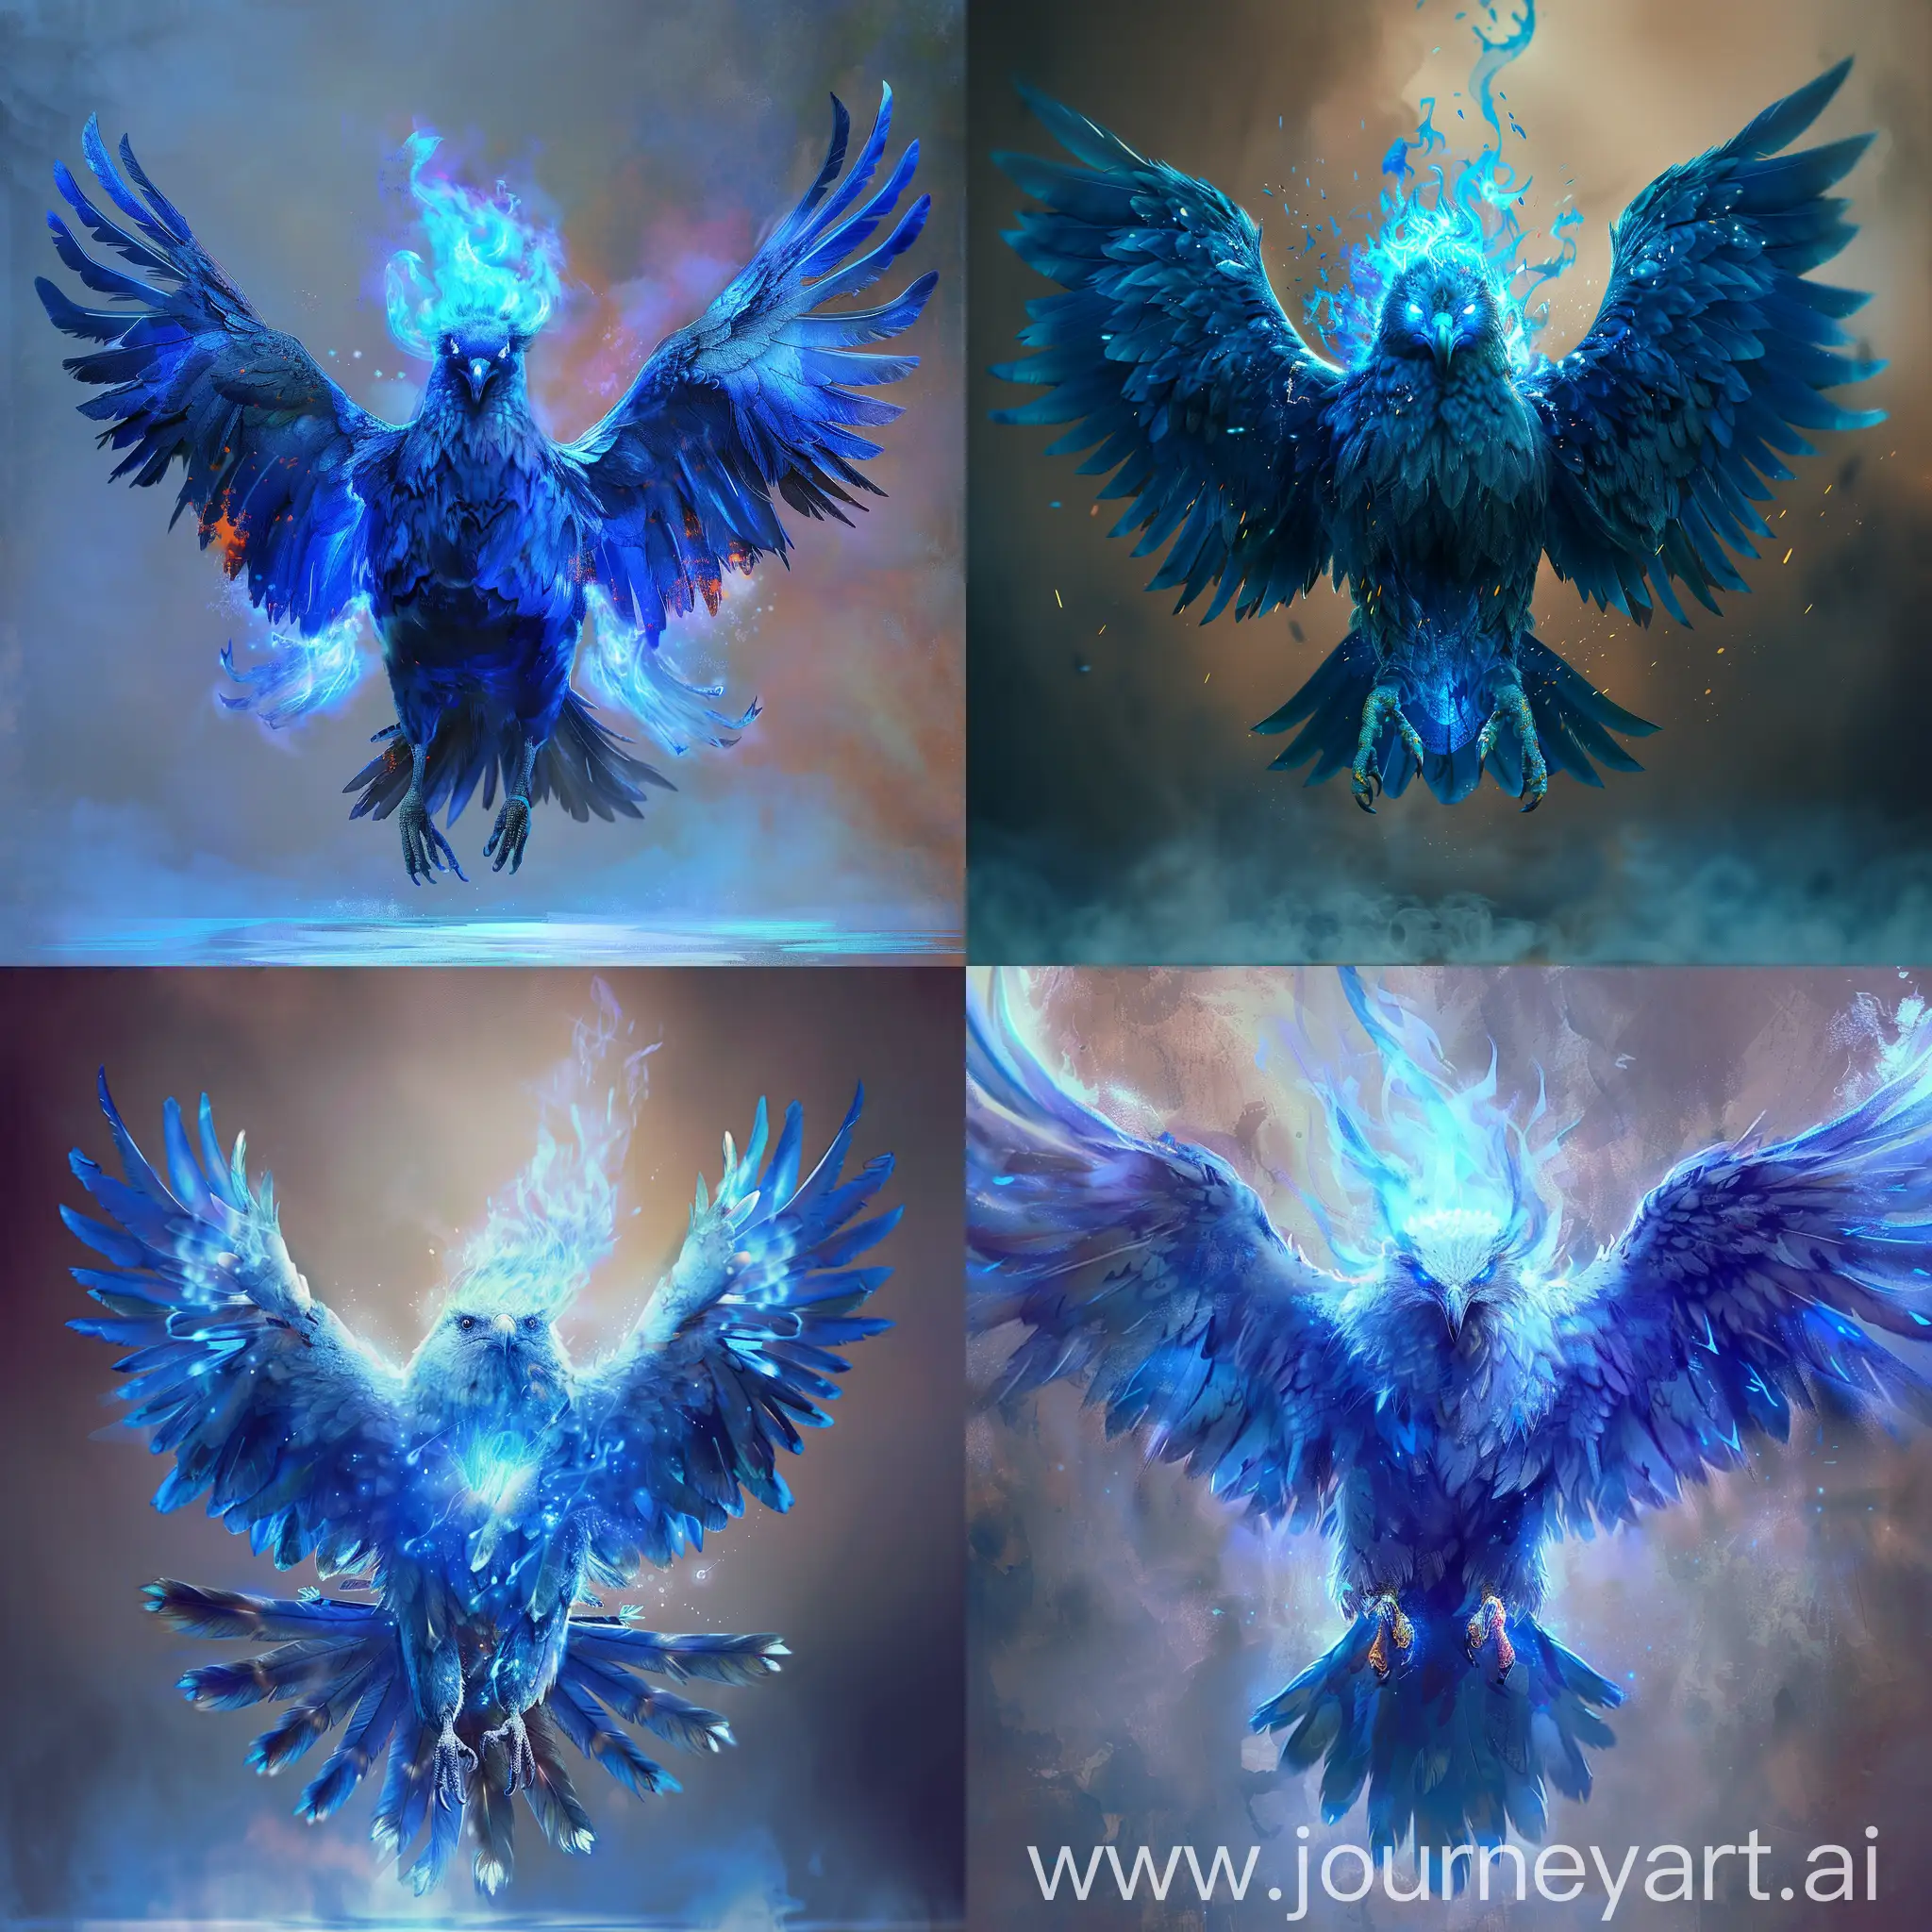 Majestic-Blue-Bird-Soaring-with-Bright-Flames-and-Glowing-Eyes